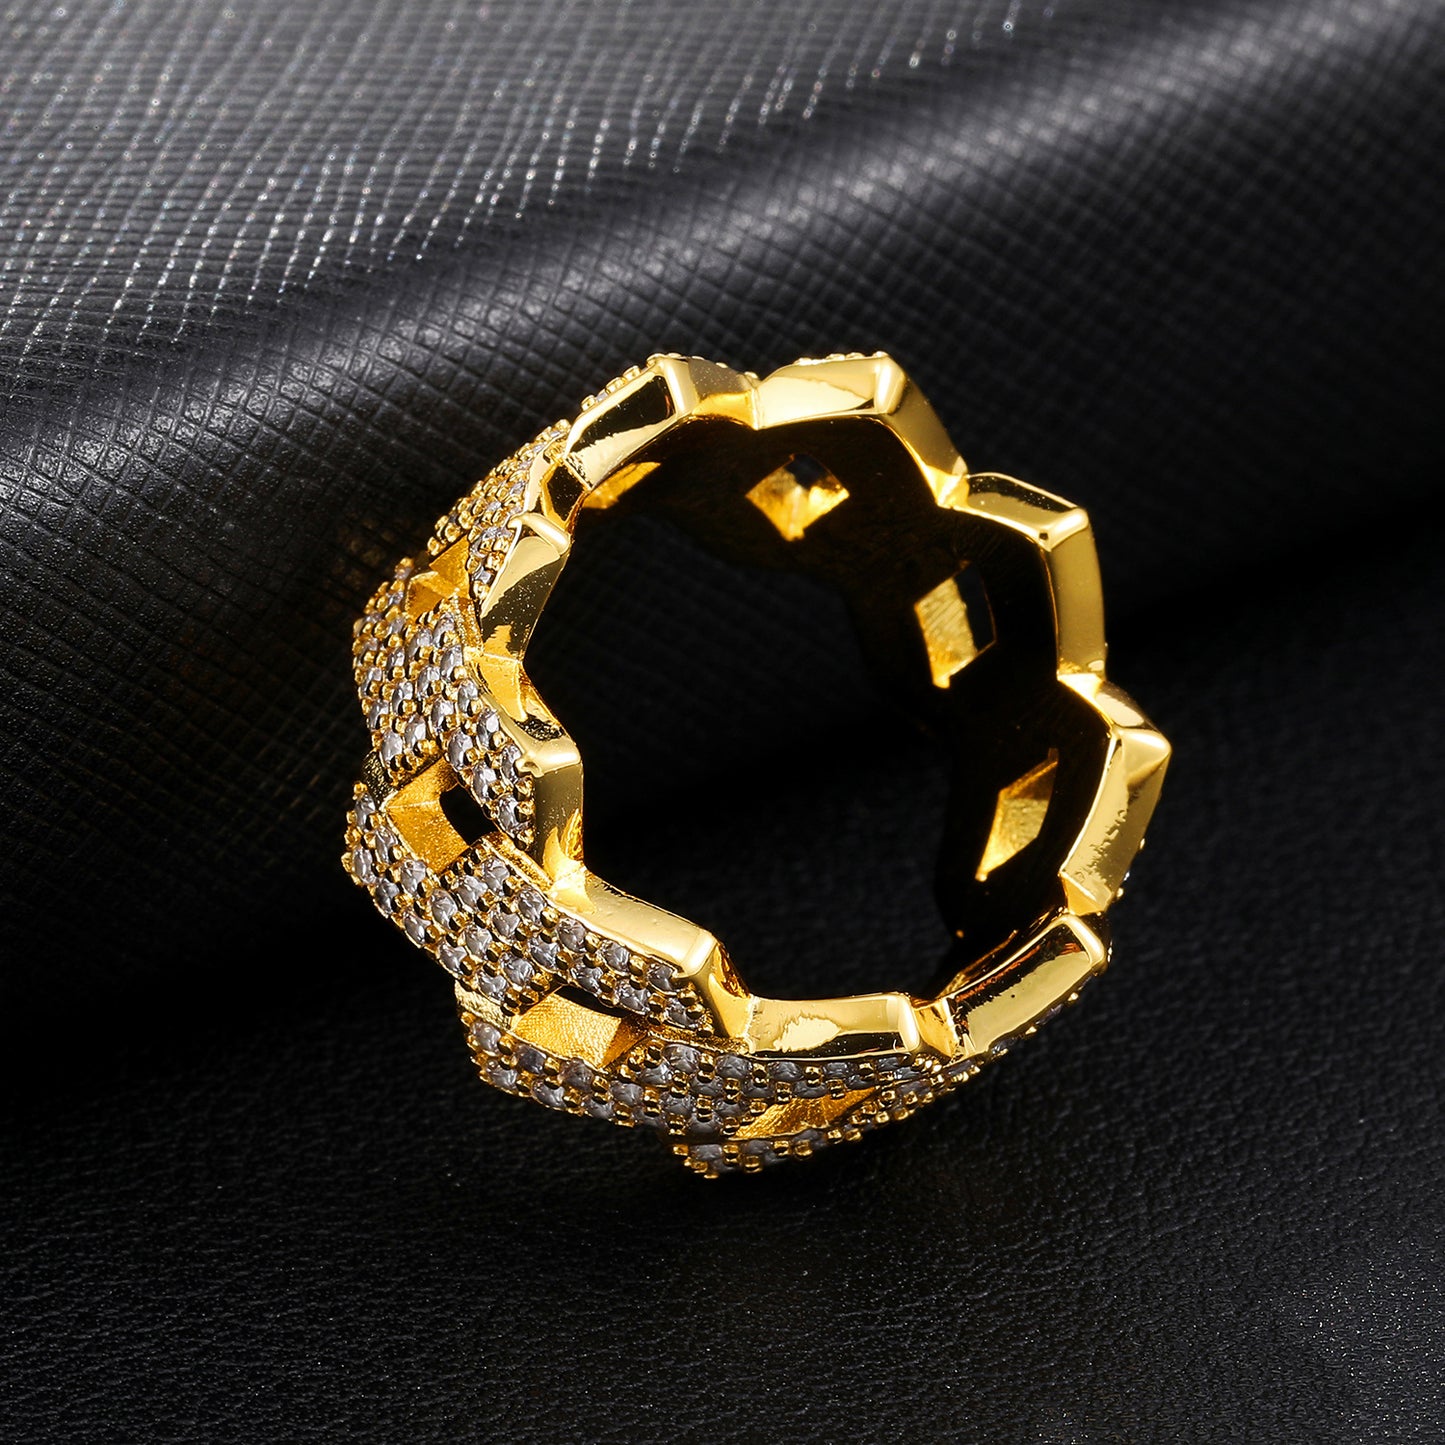 a close up of a gold ring on a black cloth